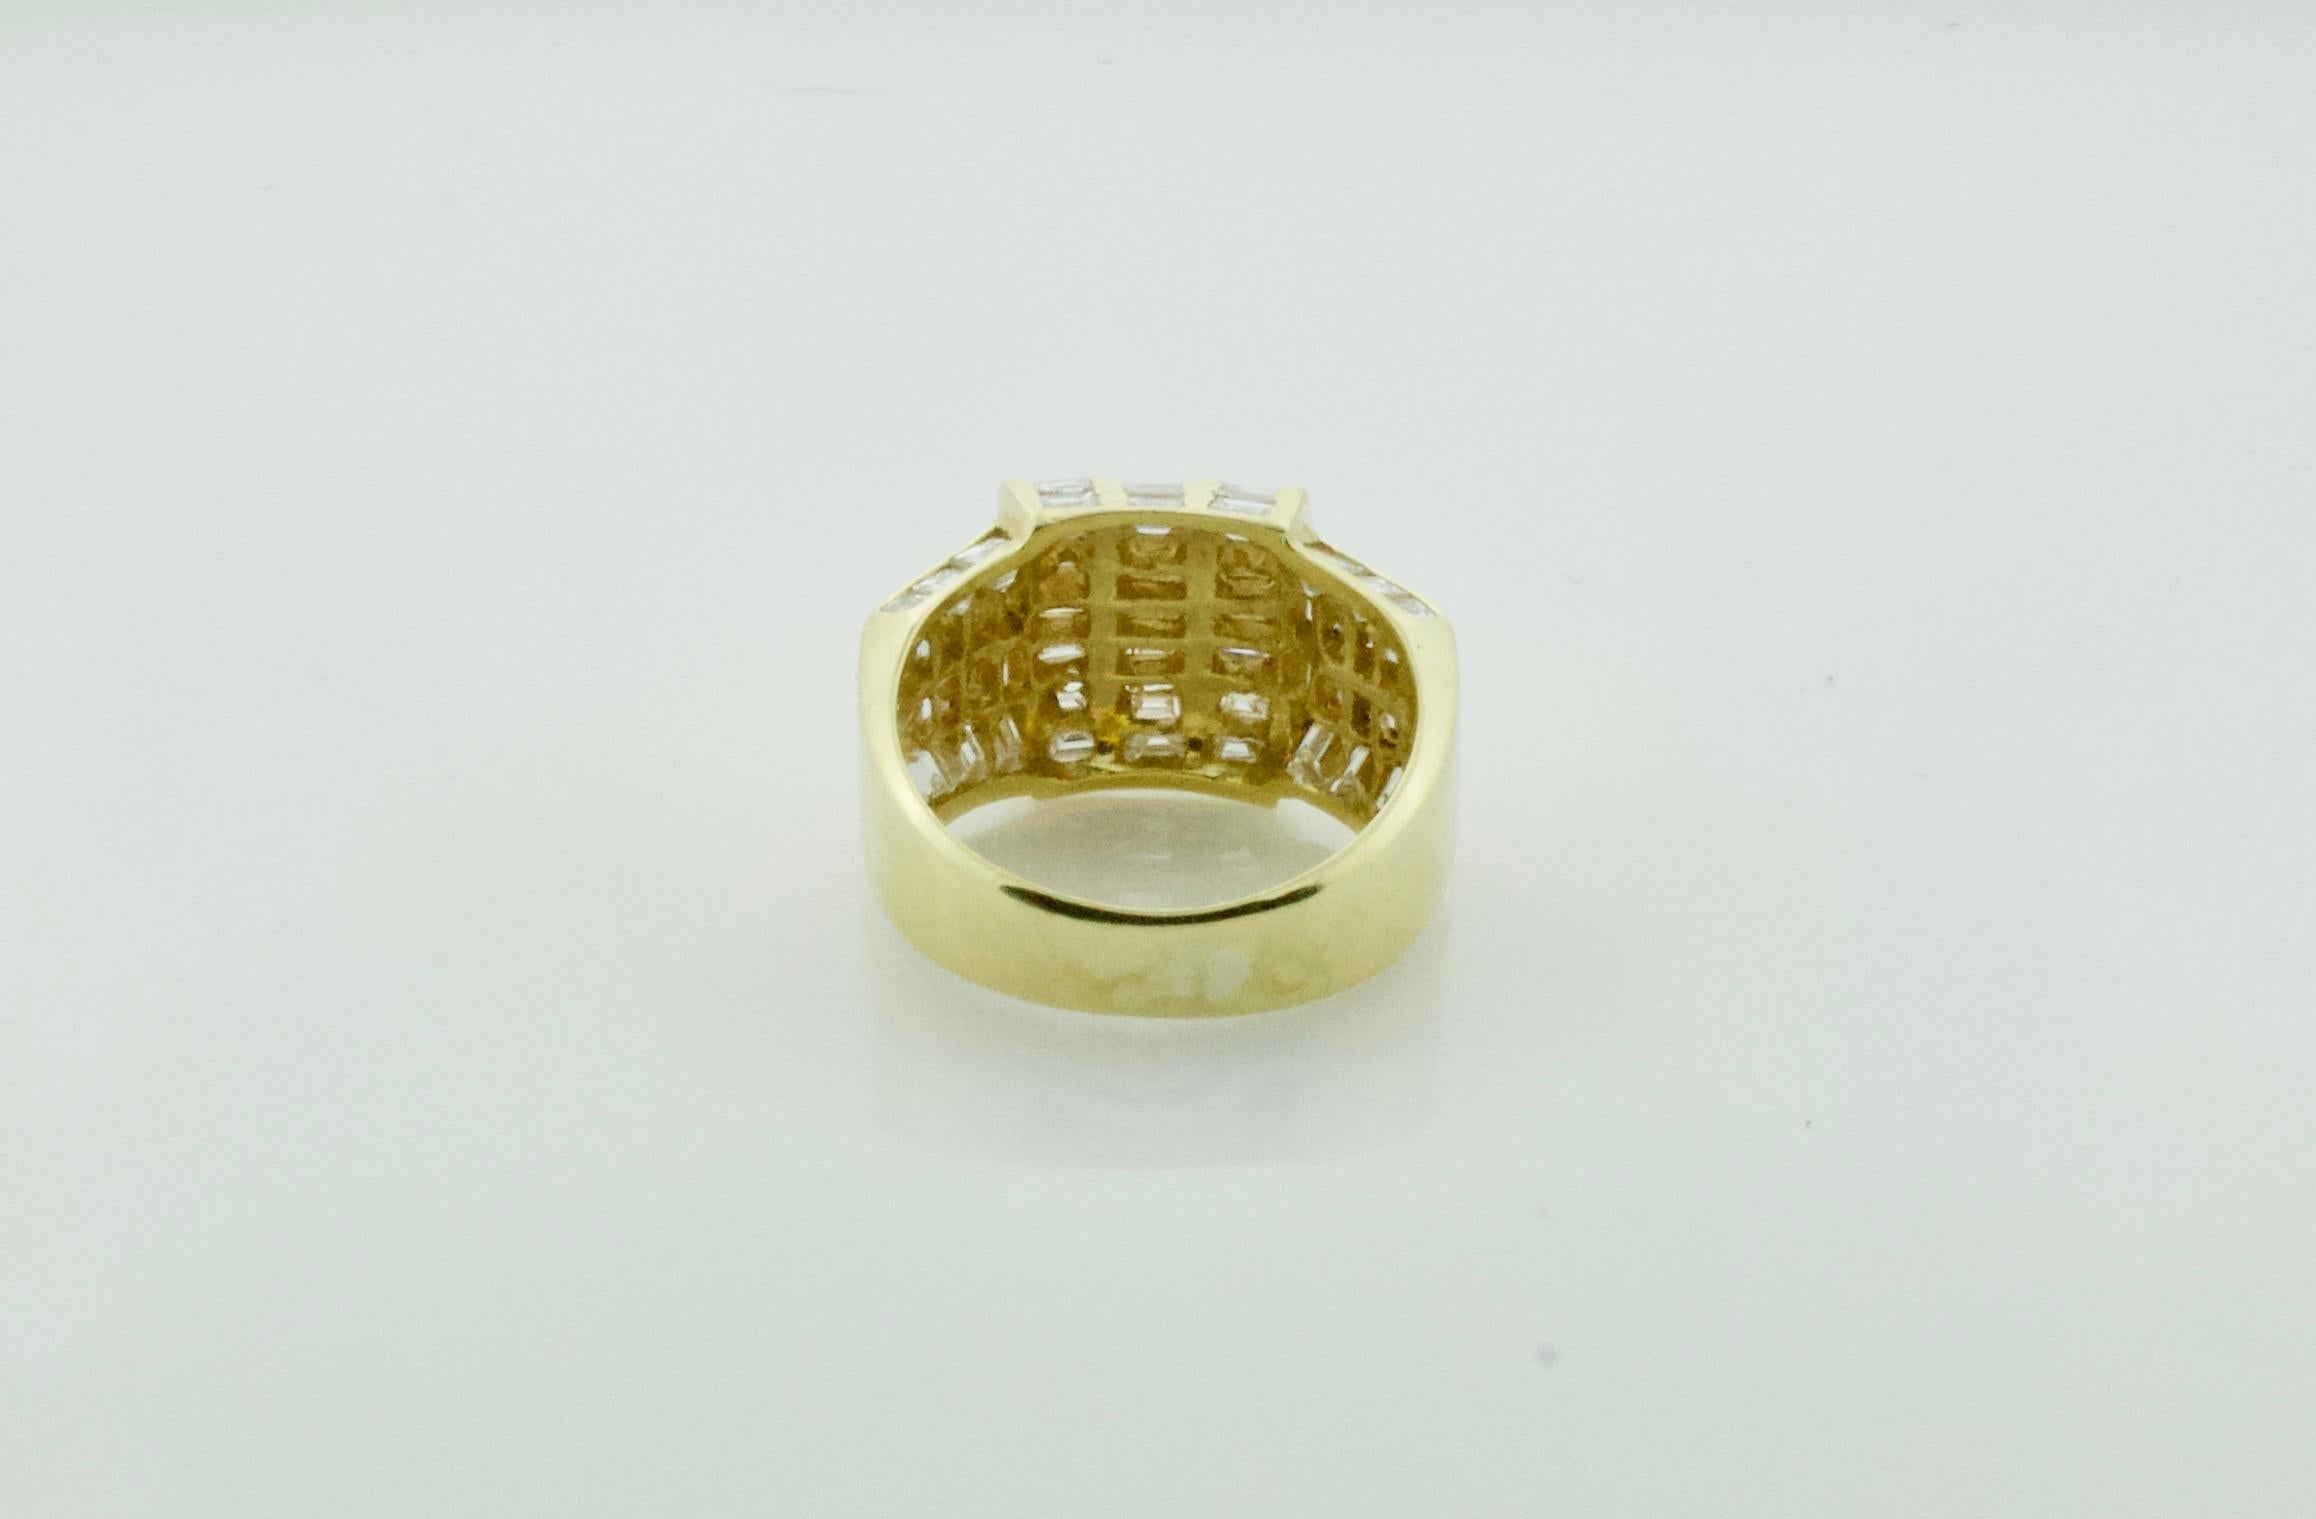 Blingy Diamond Ring in 18 Karat Yellow Gold 2.05 Carat In Excellent Condition For Sale In Wailea, HI